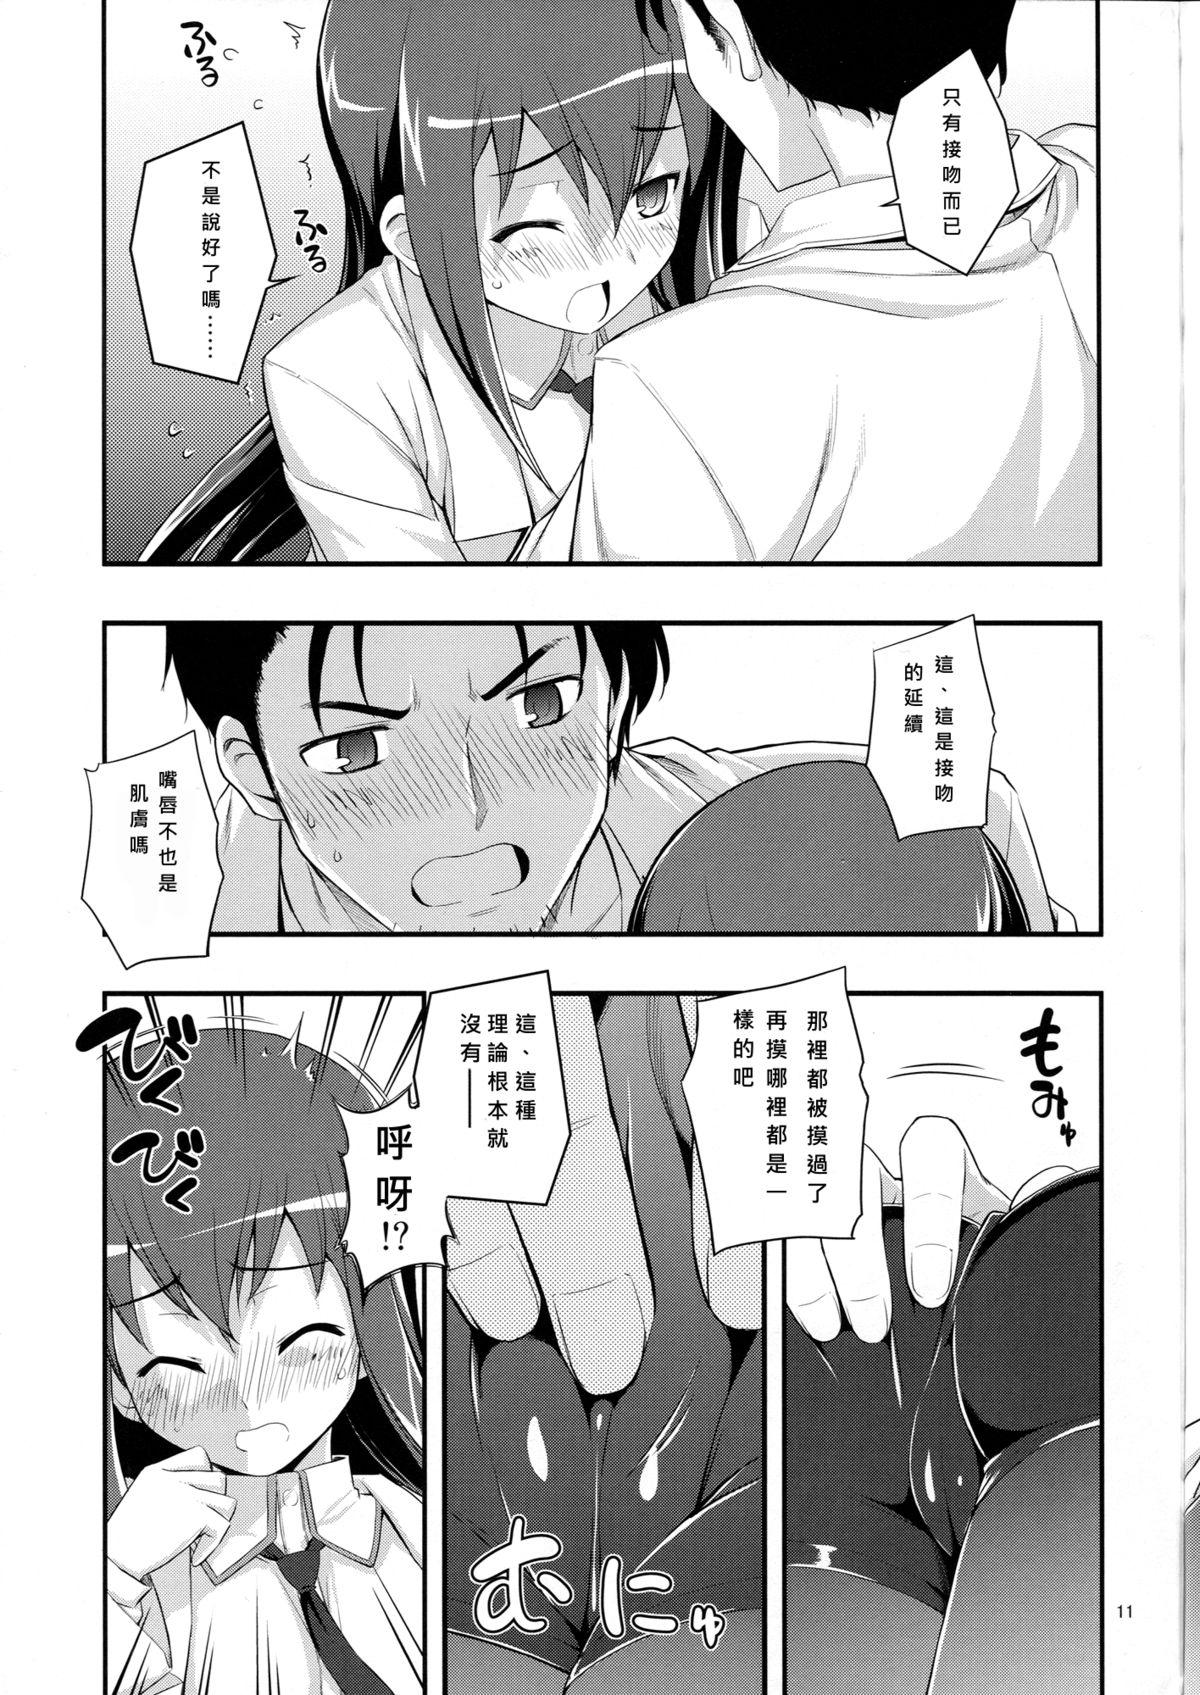 Blackmail RE 14 - Steinsgate Hard Sex - Page 11